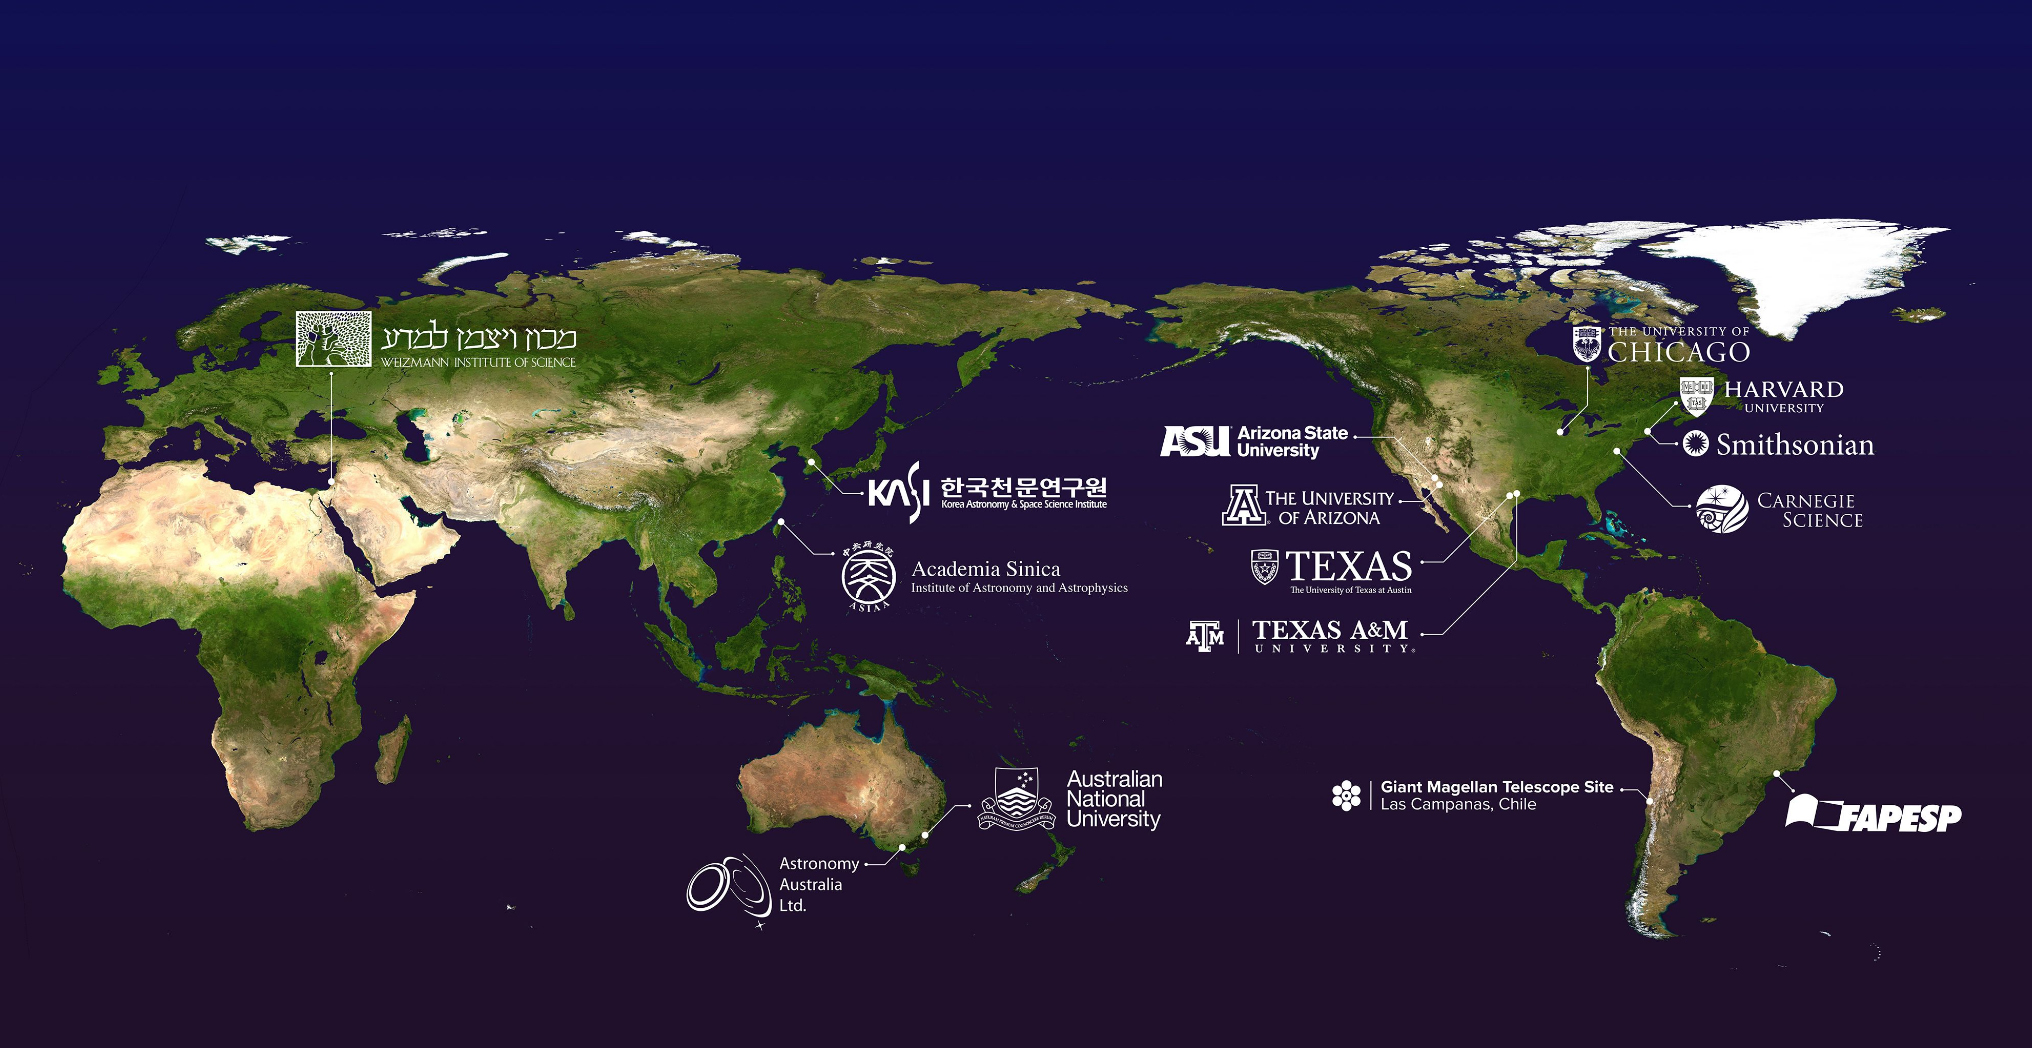 World map of the Giant Magellan Telescope international consortium showing locations and names of all 14 partners in the project